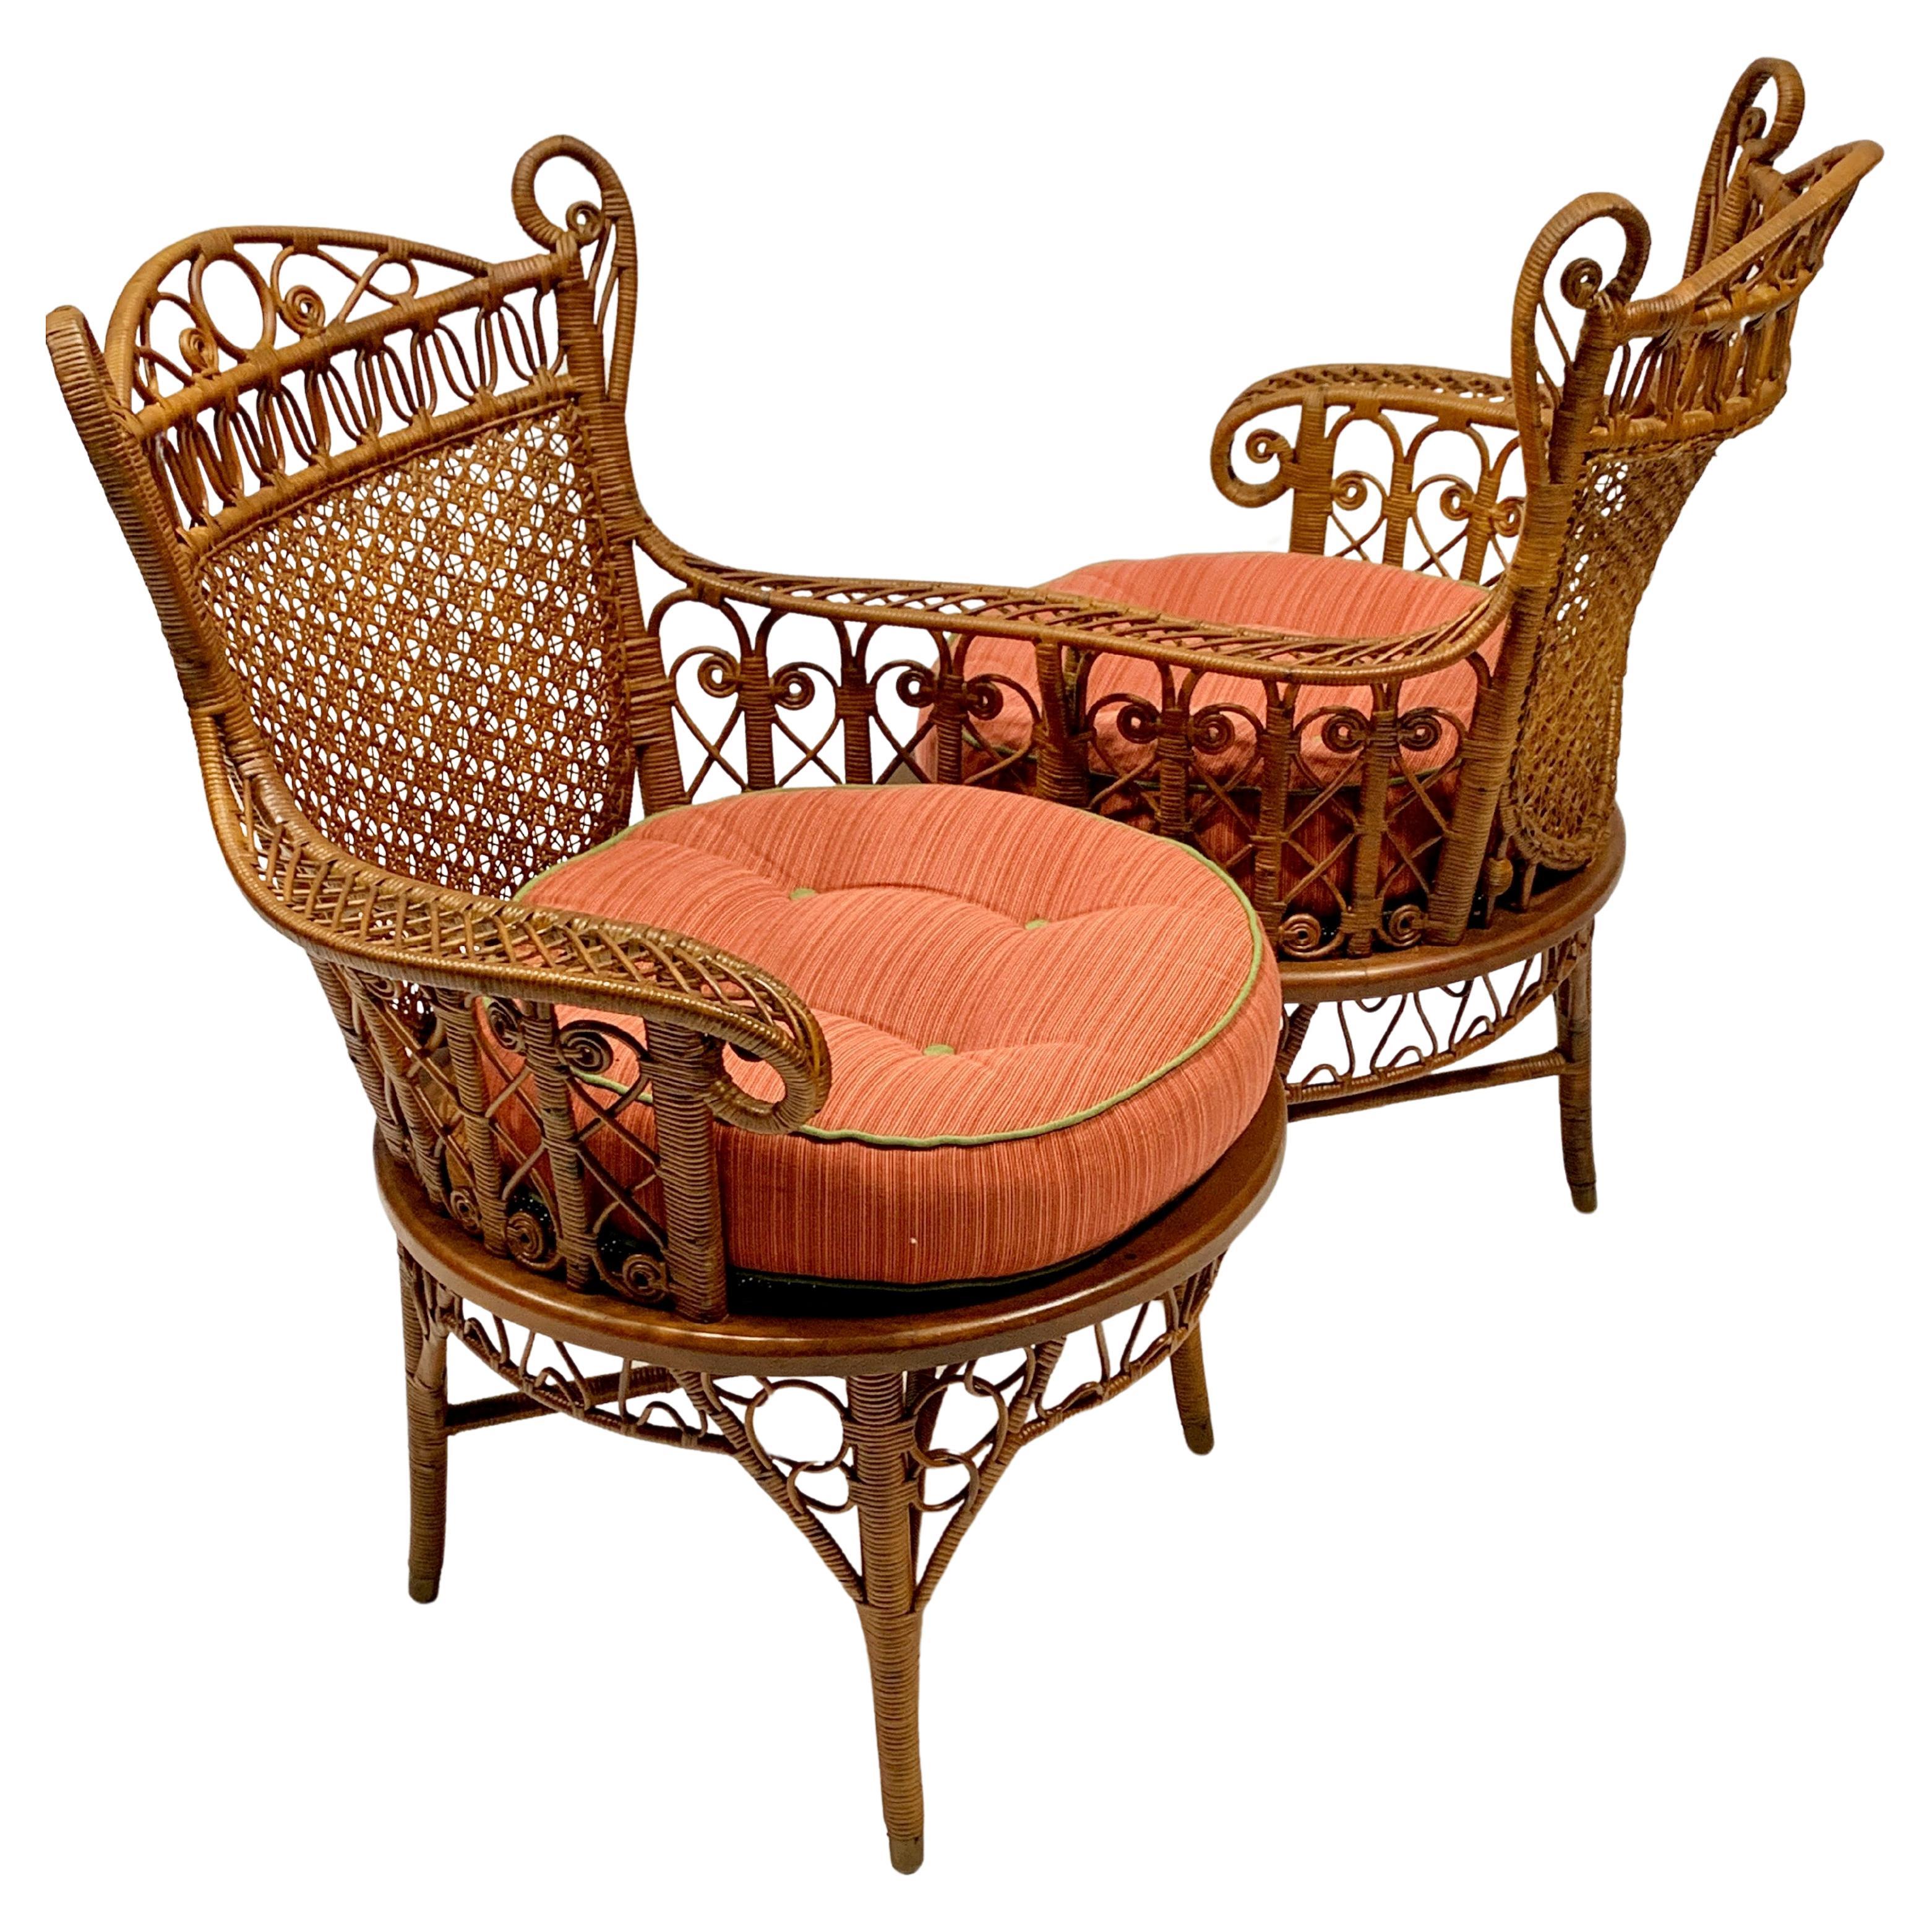 Does rattan furniture get ruined in the rain?